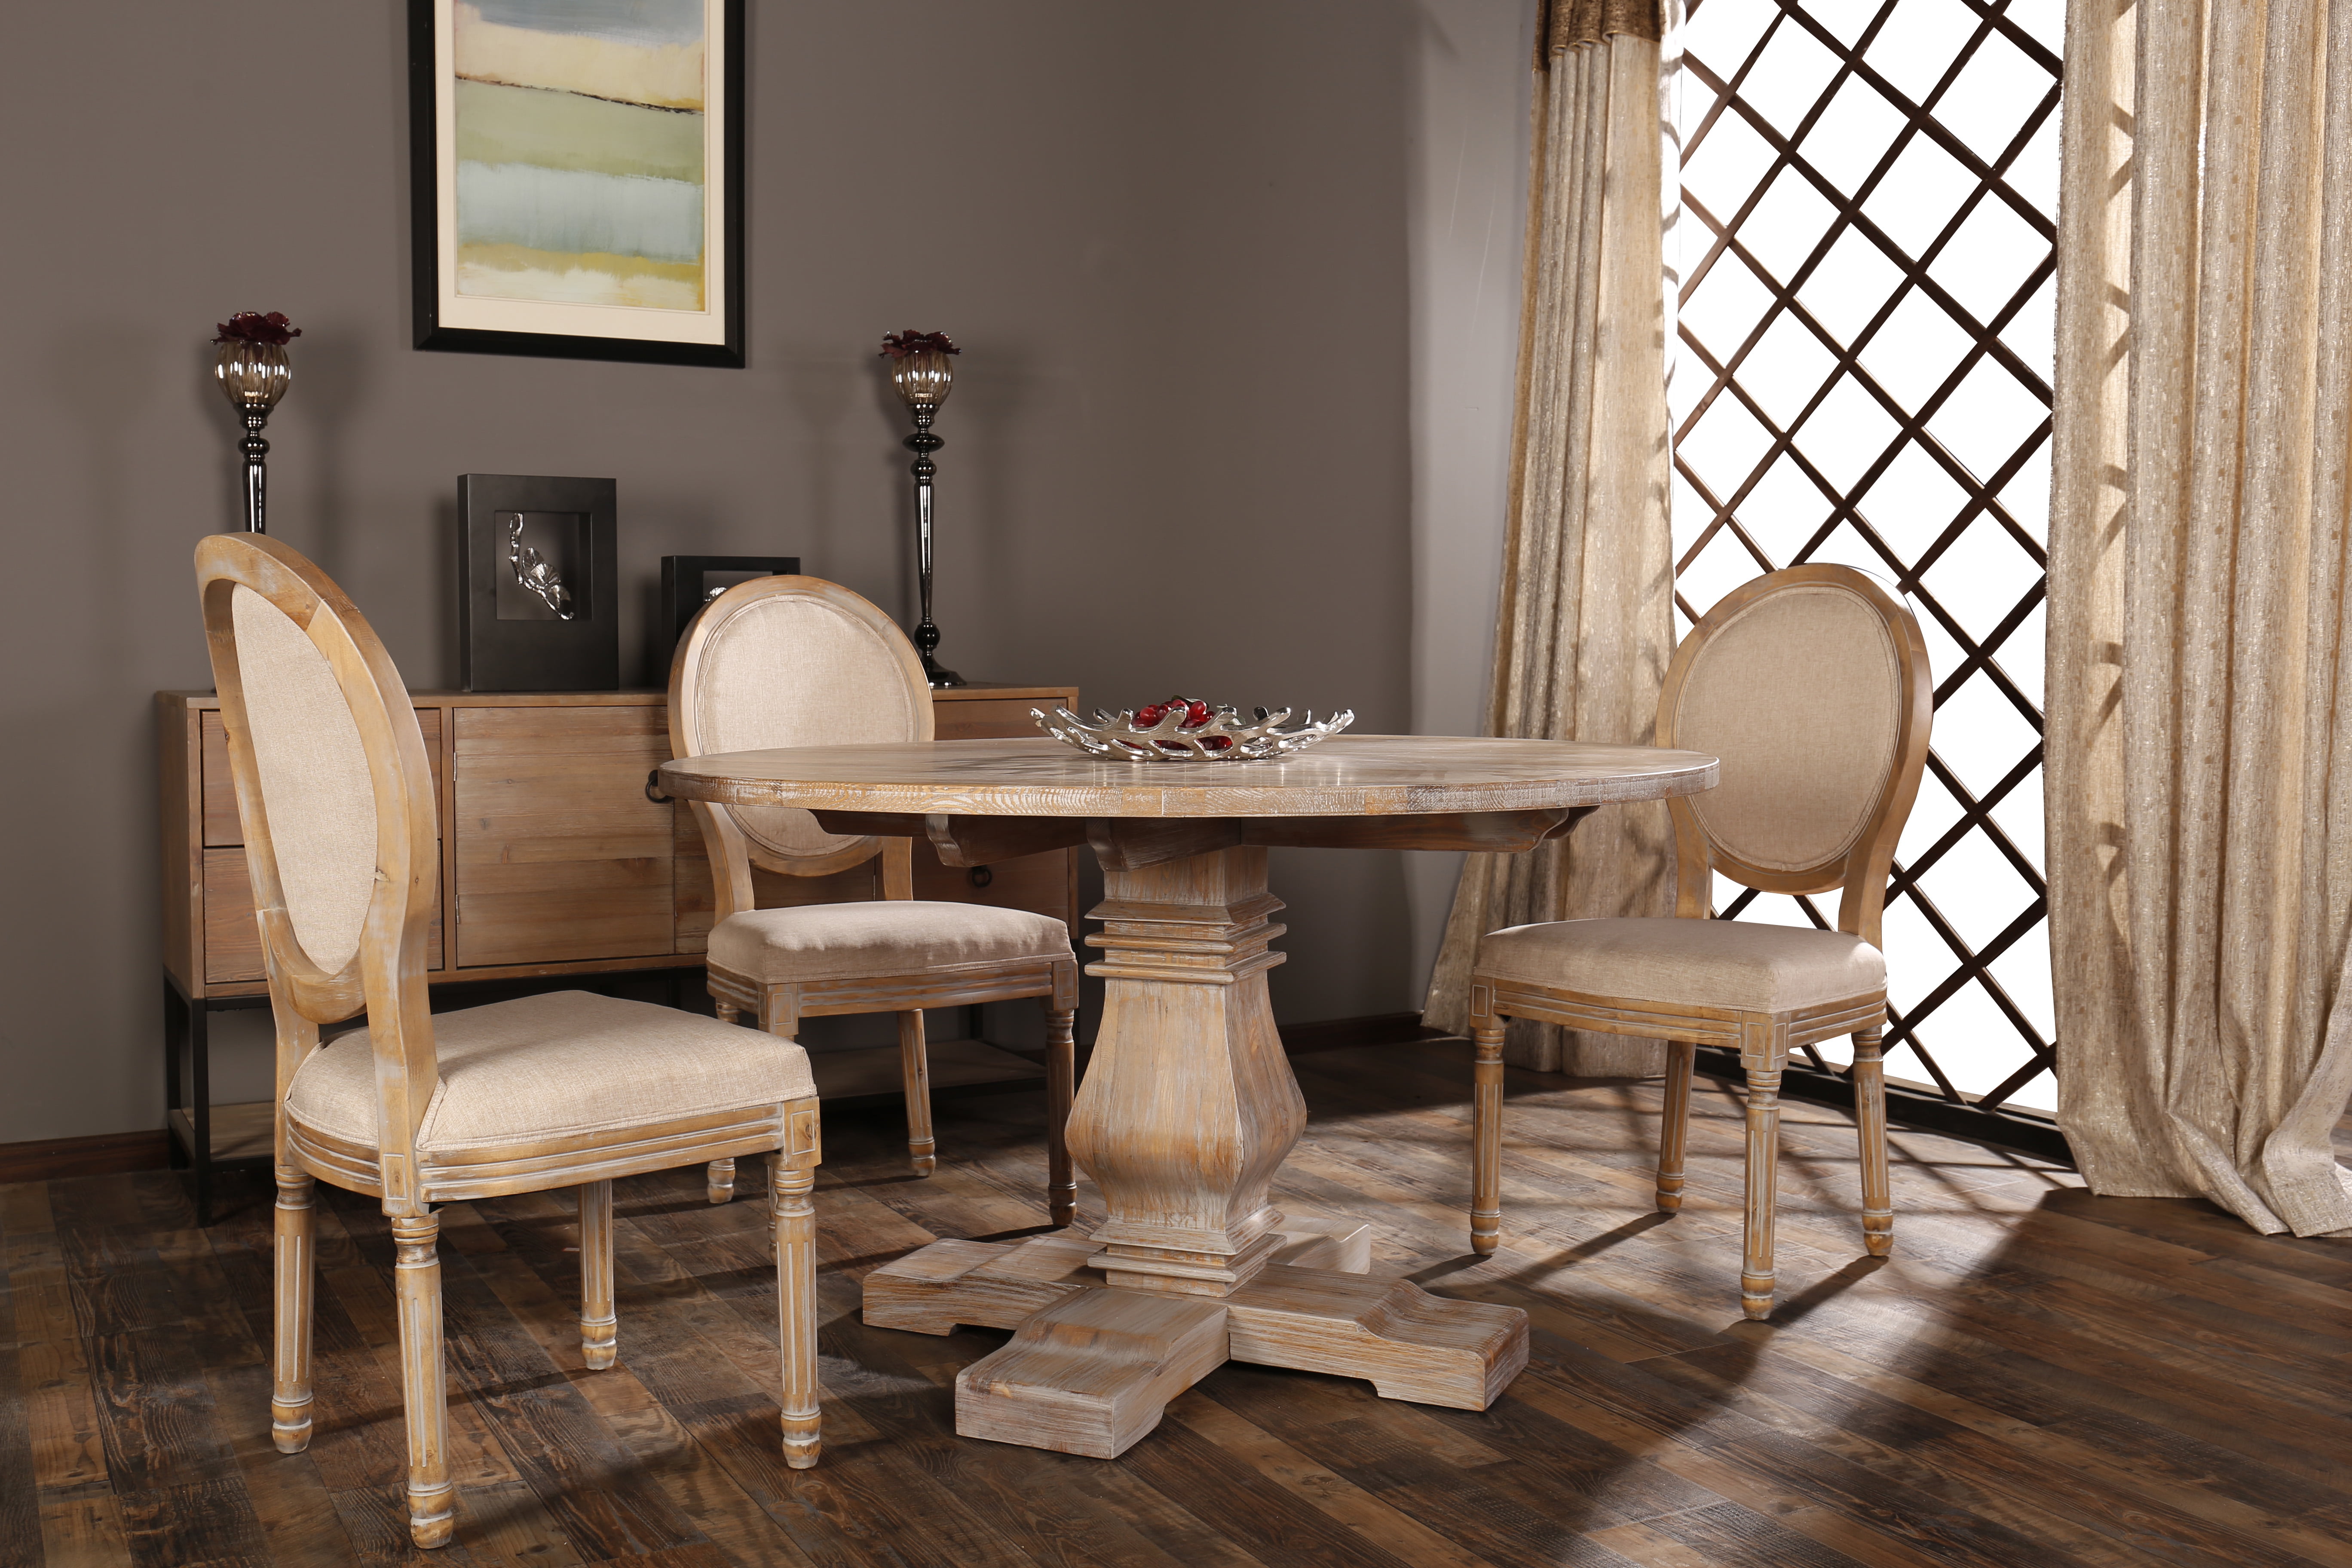 Classic Rustic Style Round Dining Room Kitchen Table - Walmart.com ...